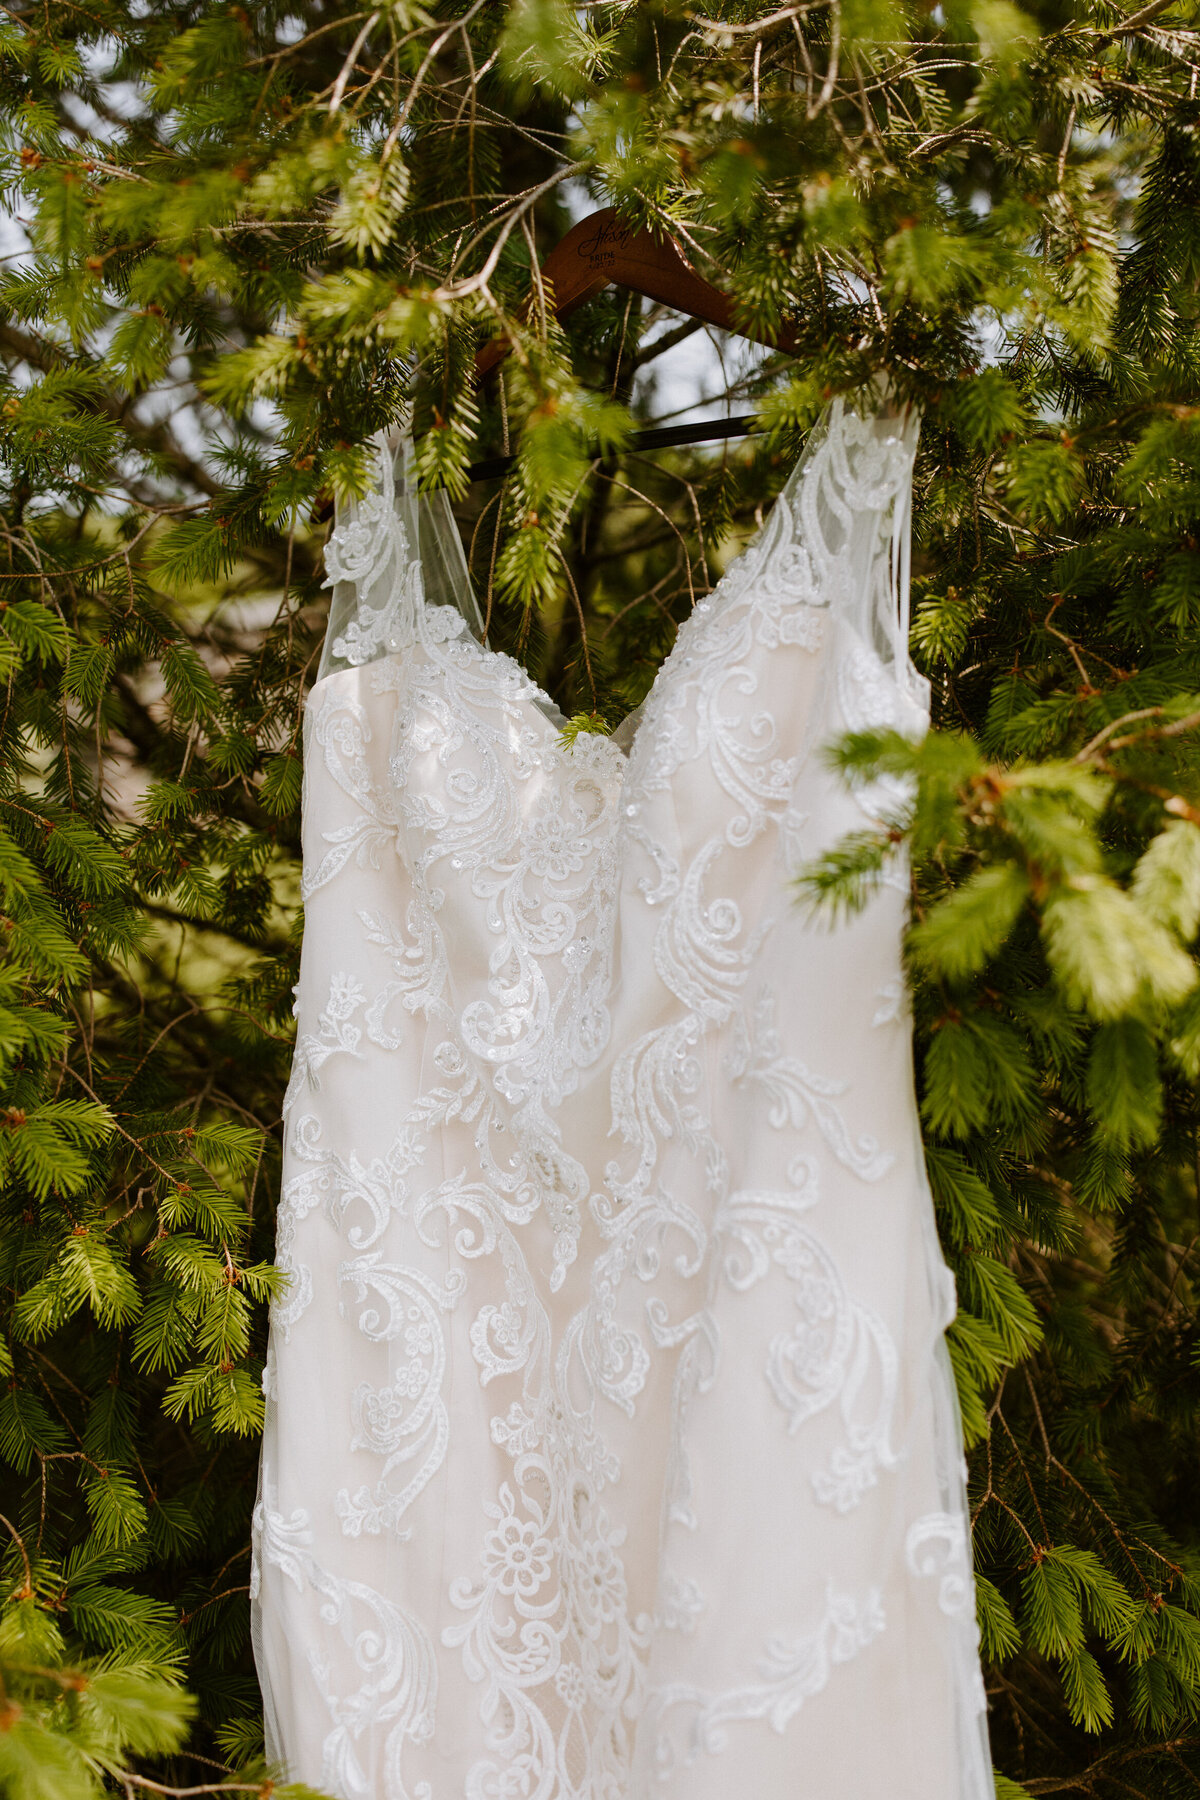 wedding dress hanging from branches in a tree